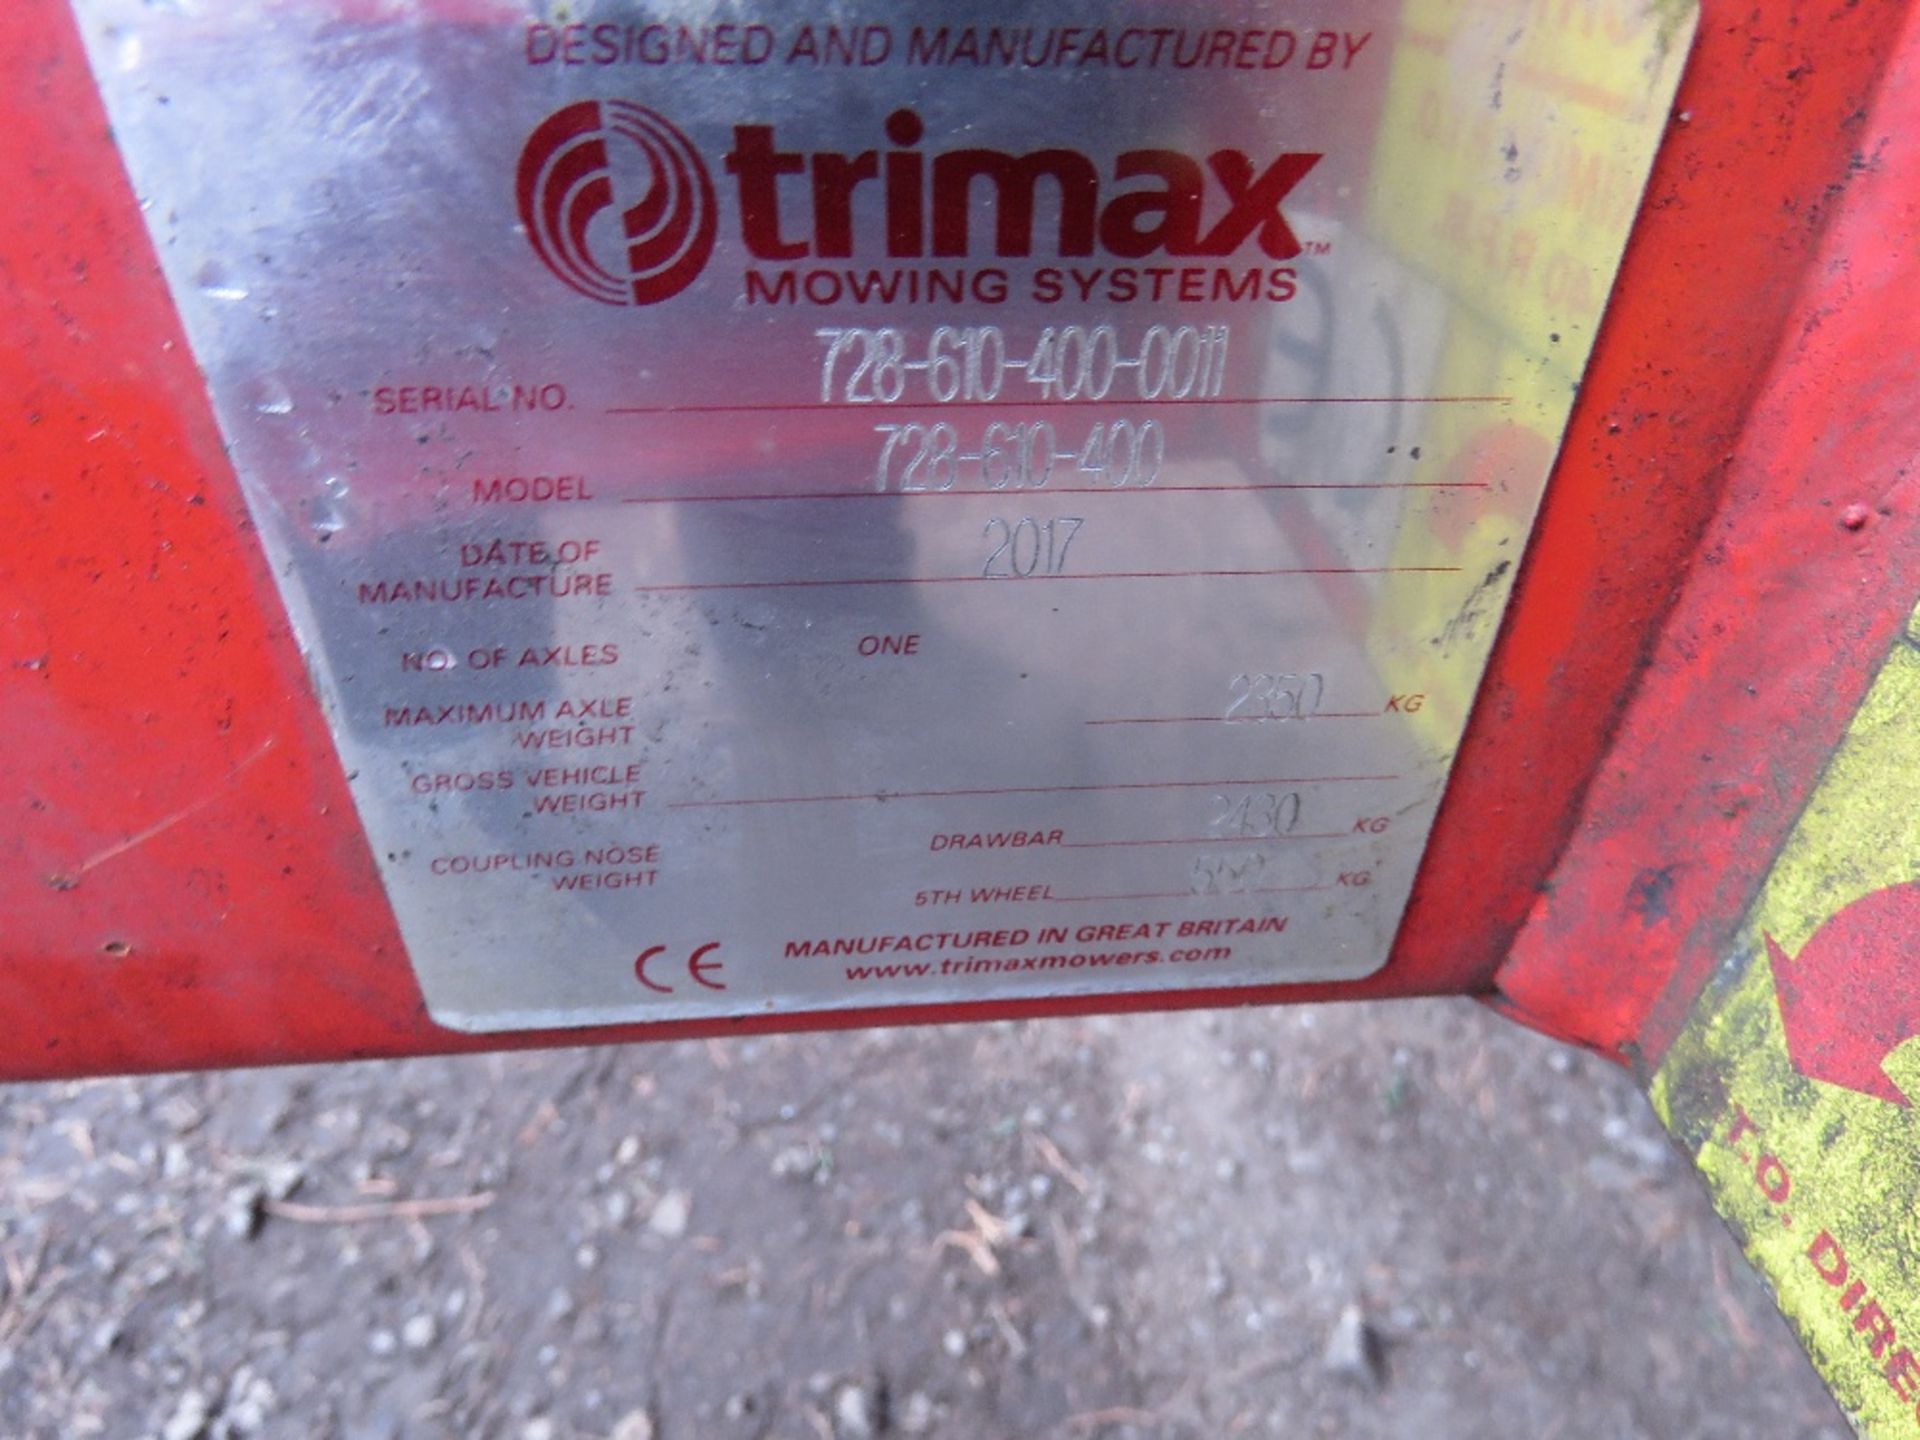 TRIMAX 728-610-400 BATWING TYPE ROLLER MOWER, YEAR 2017. PEGASUS S3 HEADS. NB: REQUIRES REPAIR TO CH - Image 9 of 14